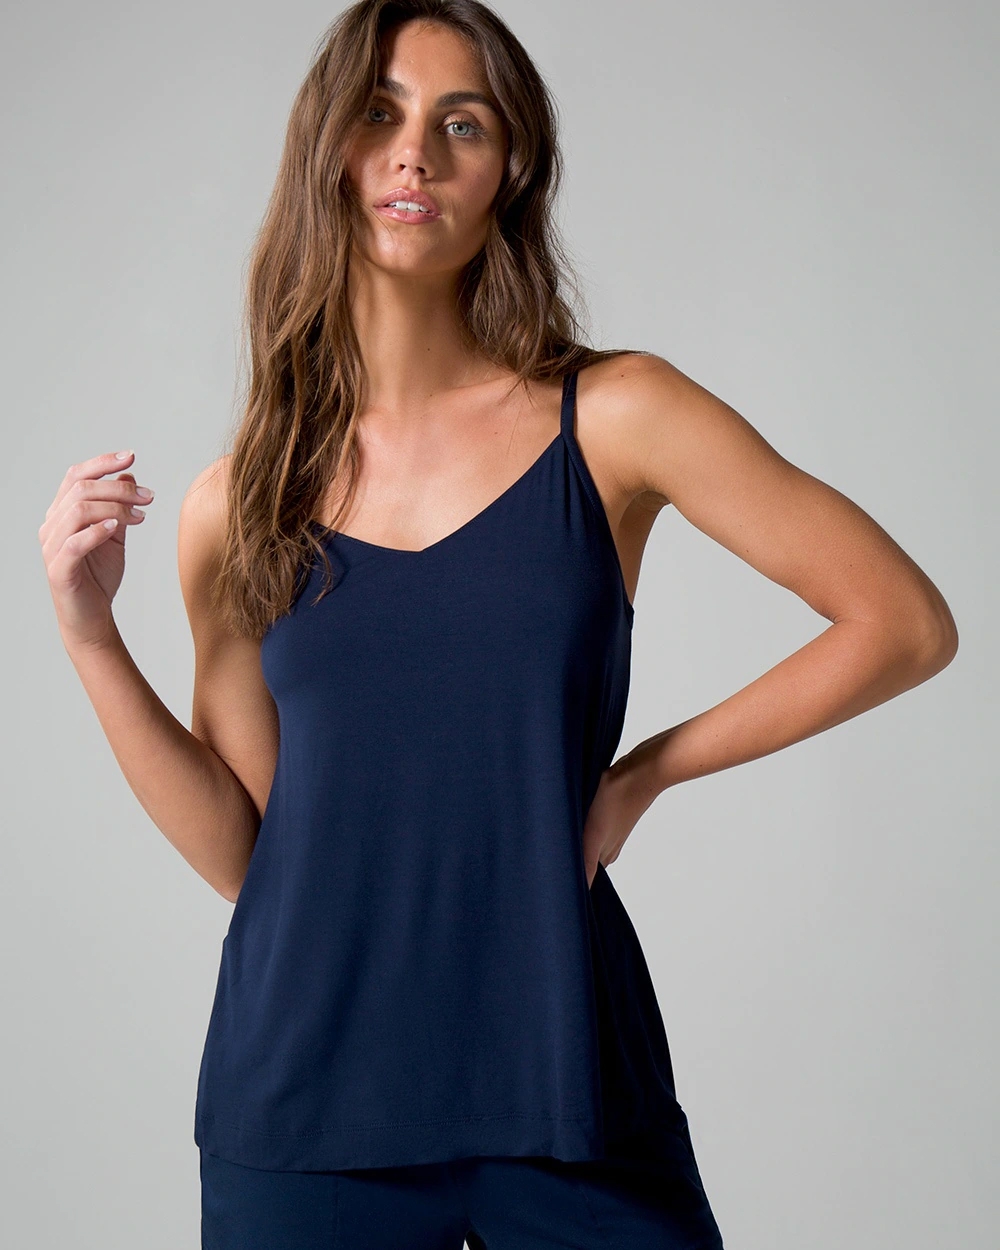 Soma<sup class=st-superscript>®</sup> women’s model wearing navy shorts and a navy tank top.